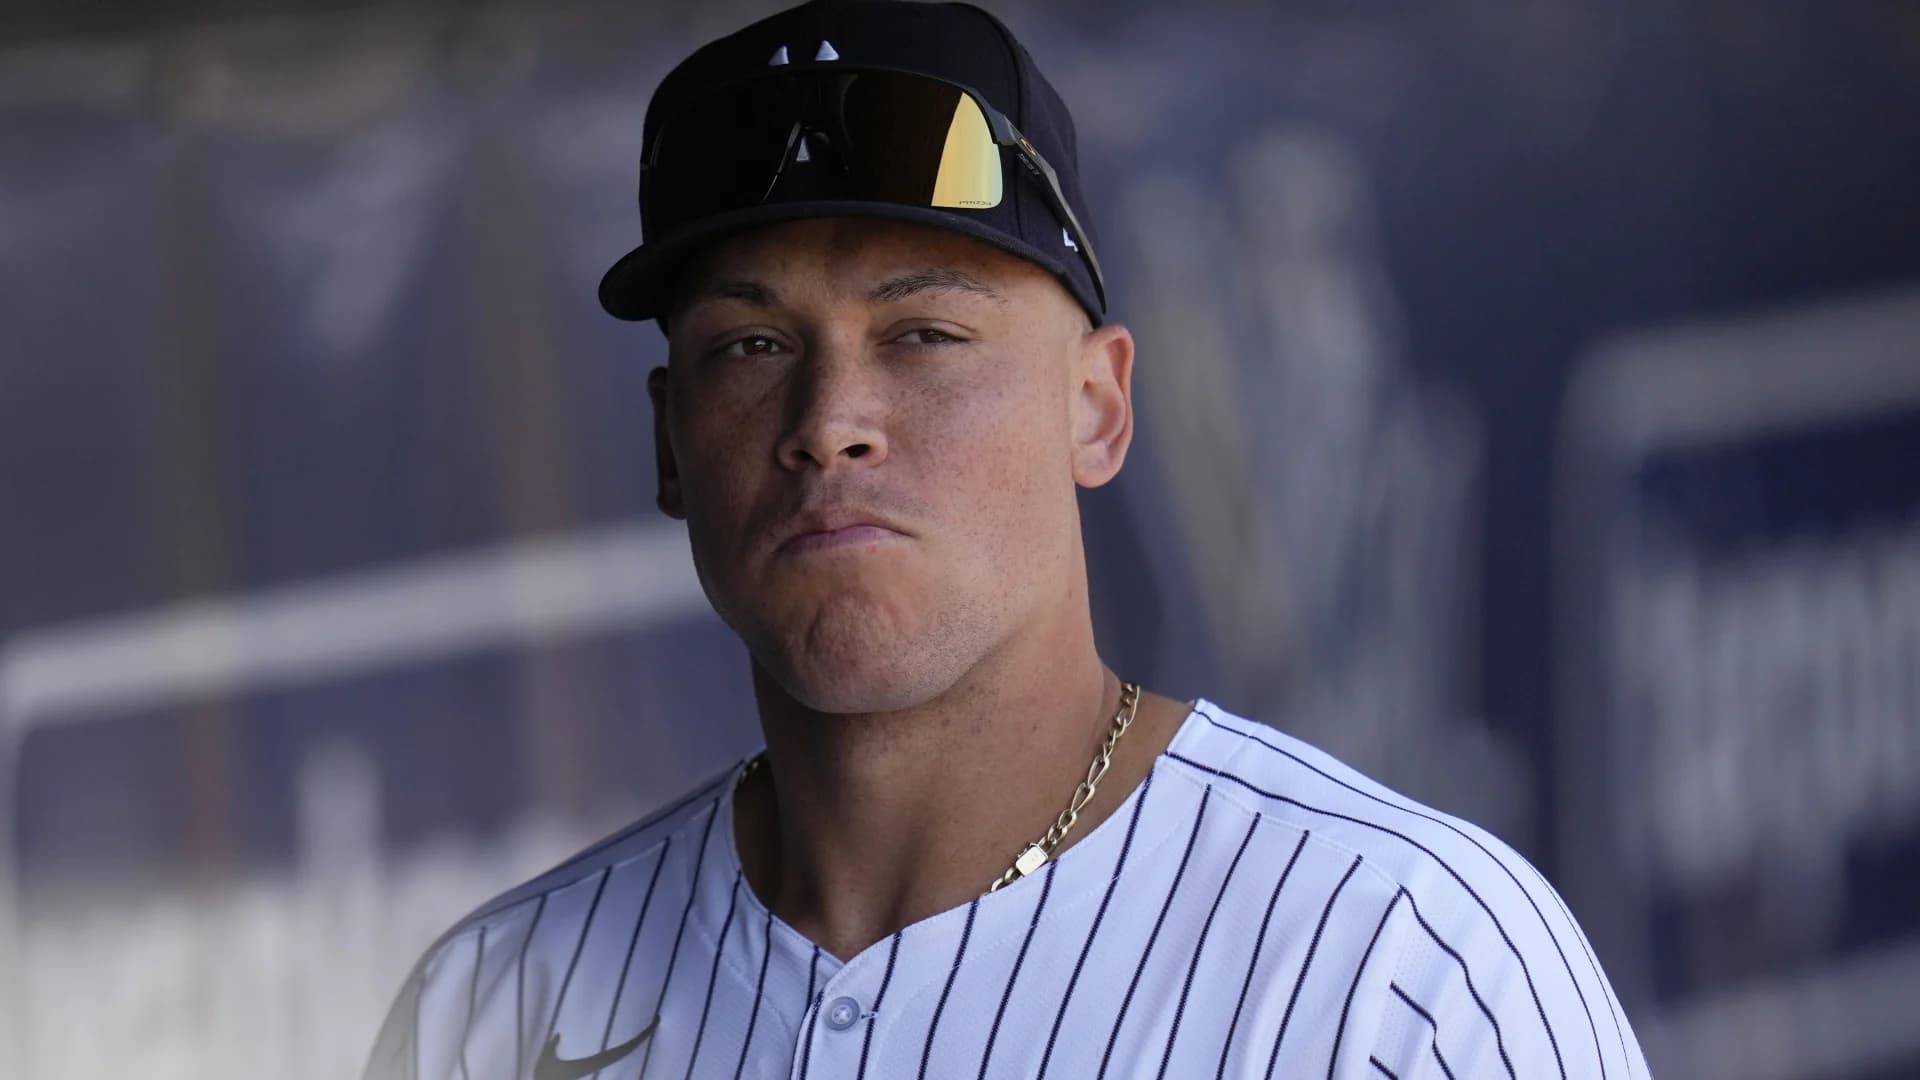 Yankees star Aaron Judge expects to be ready for opening day after MRI of abdomen